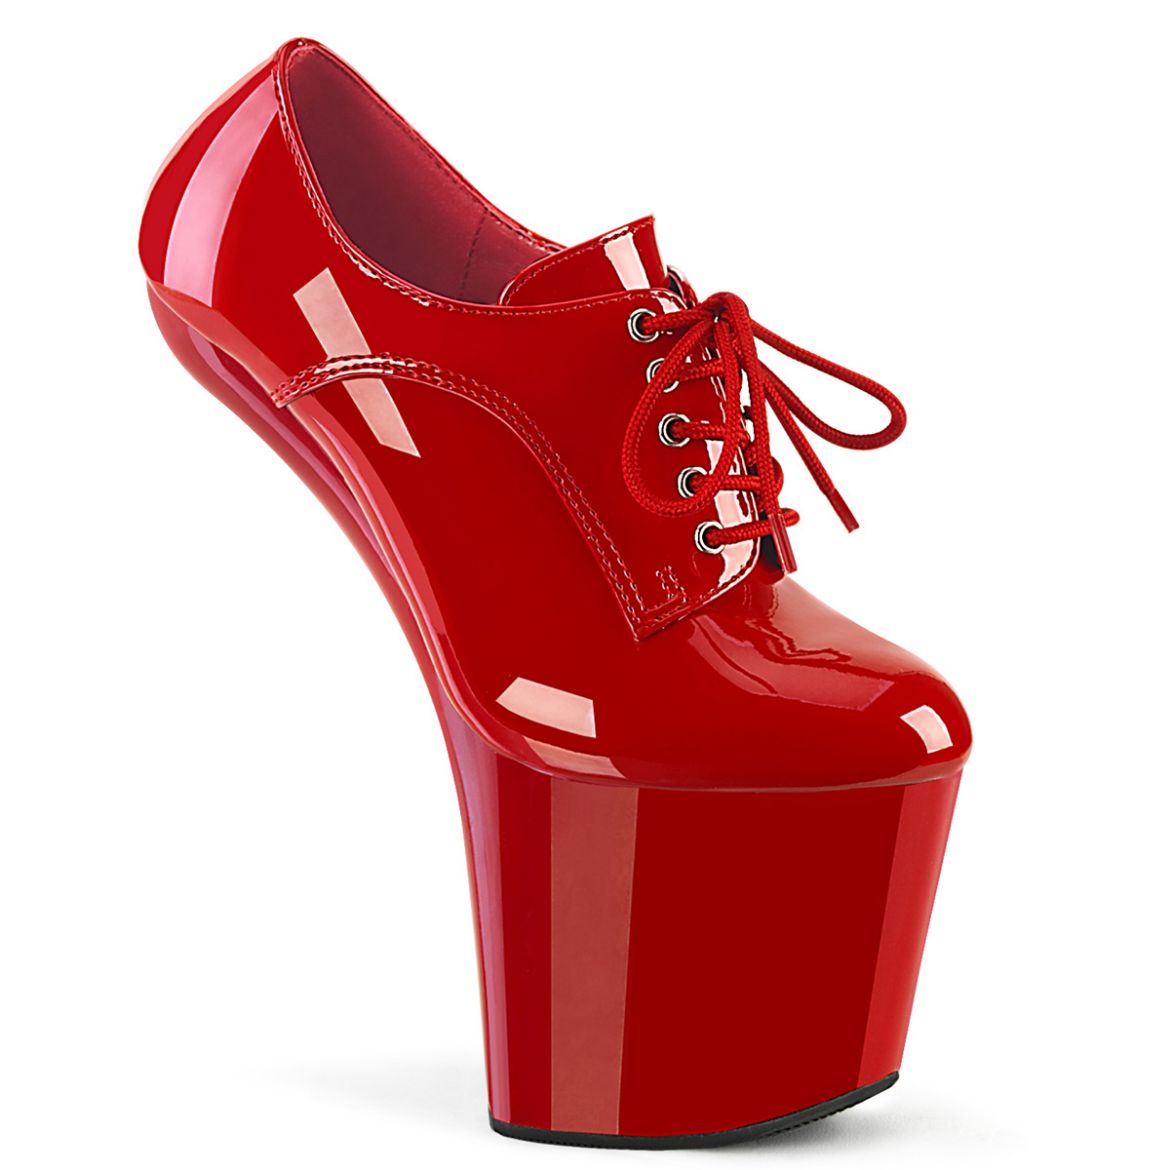 Product image of Pleaser CRAZE-860 Red Pat/Red 8 Inch Heelless 3 Inch PF Oxford Lace-Up Pump